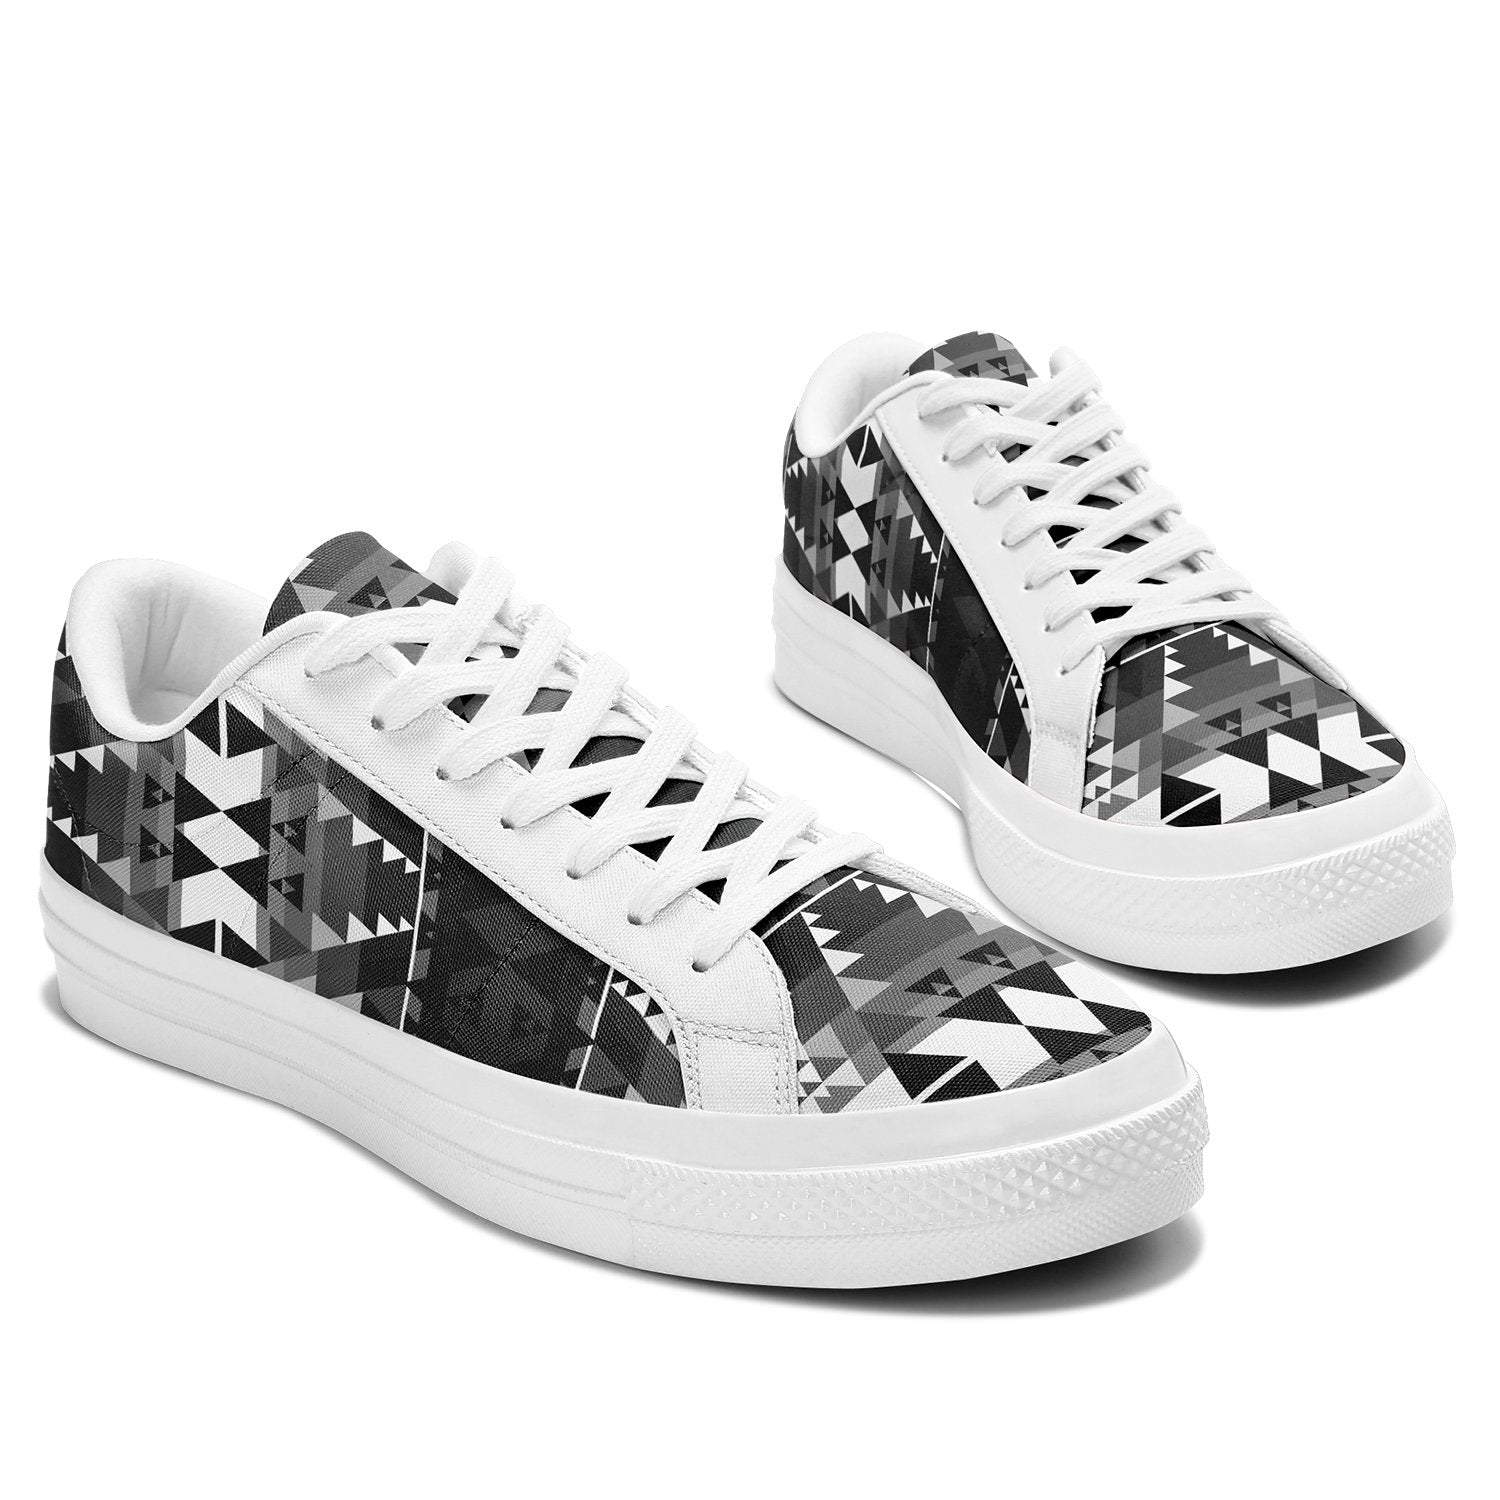 Writing on Stone Black and White Aapisi Low Top Canvas Shoes White Sole 49 Dzine 